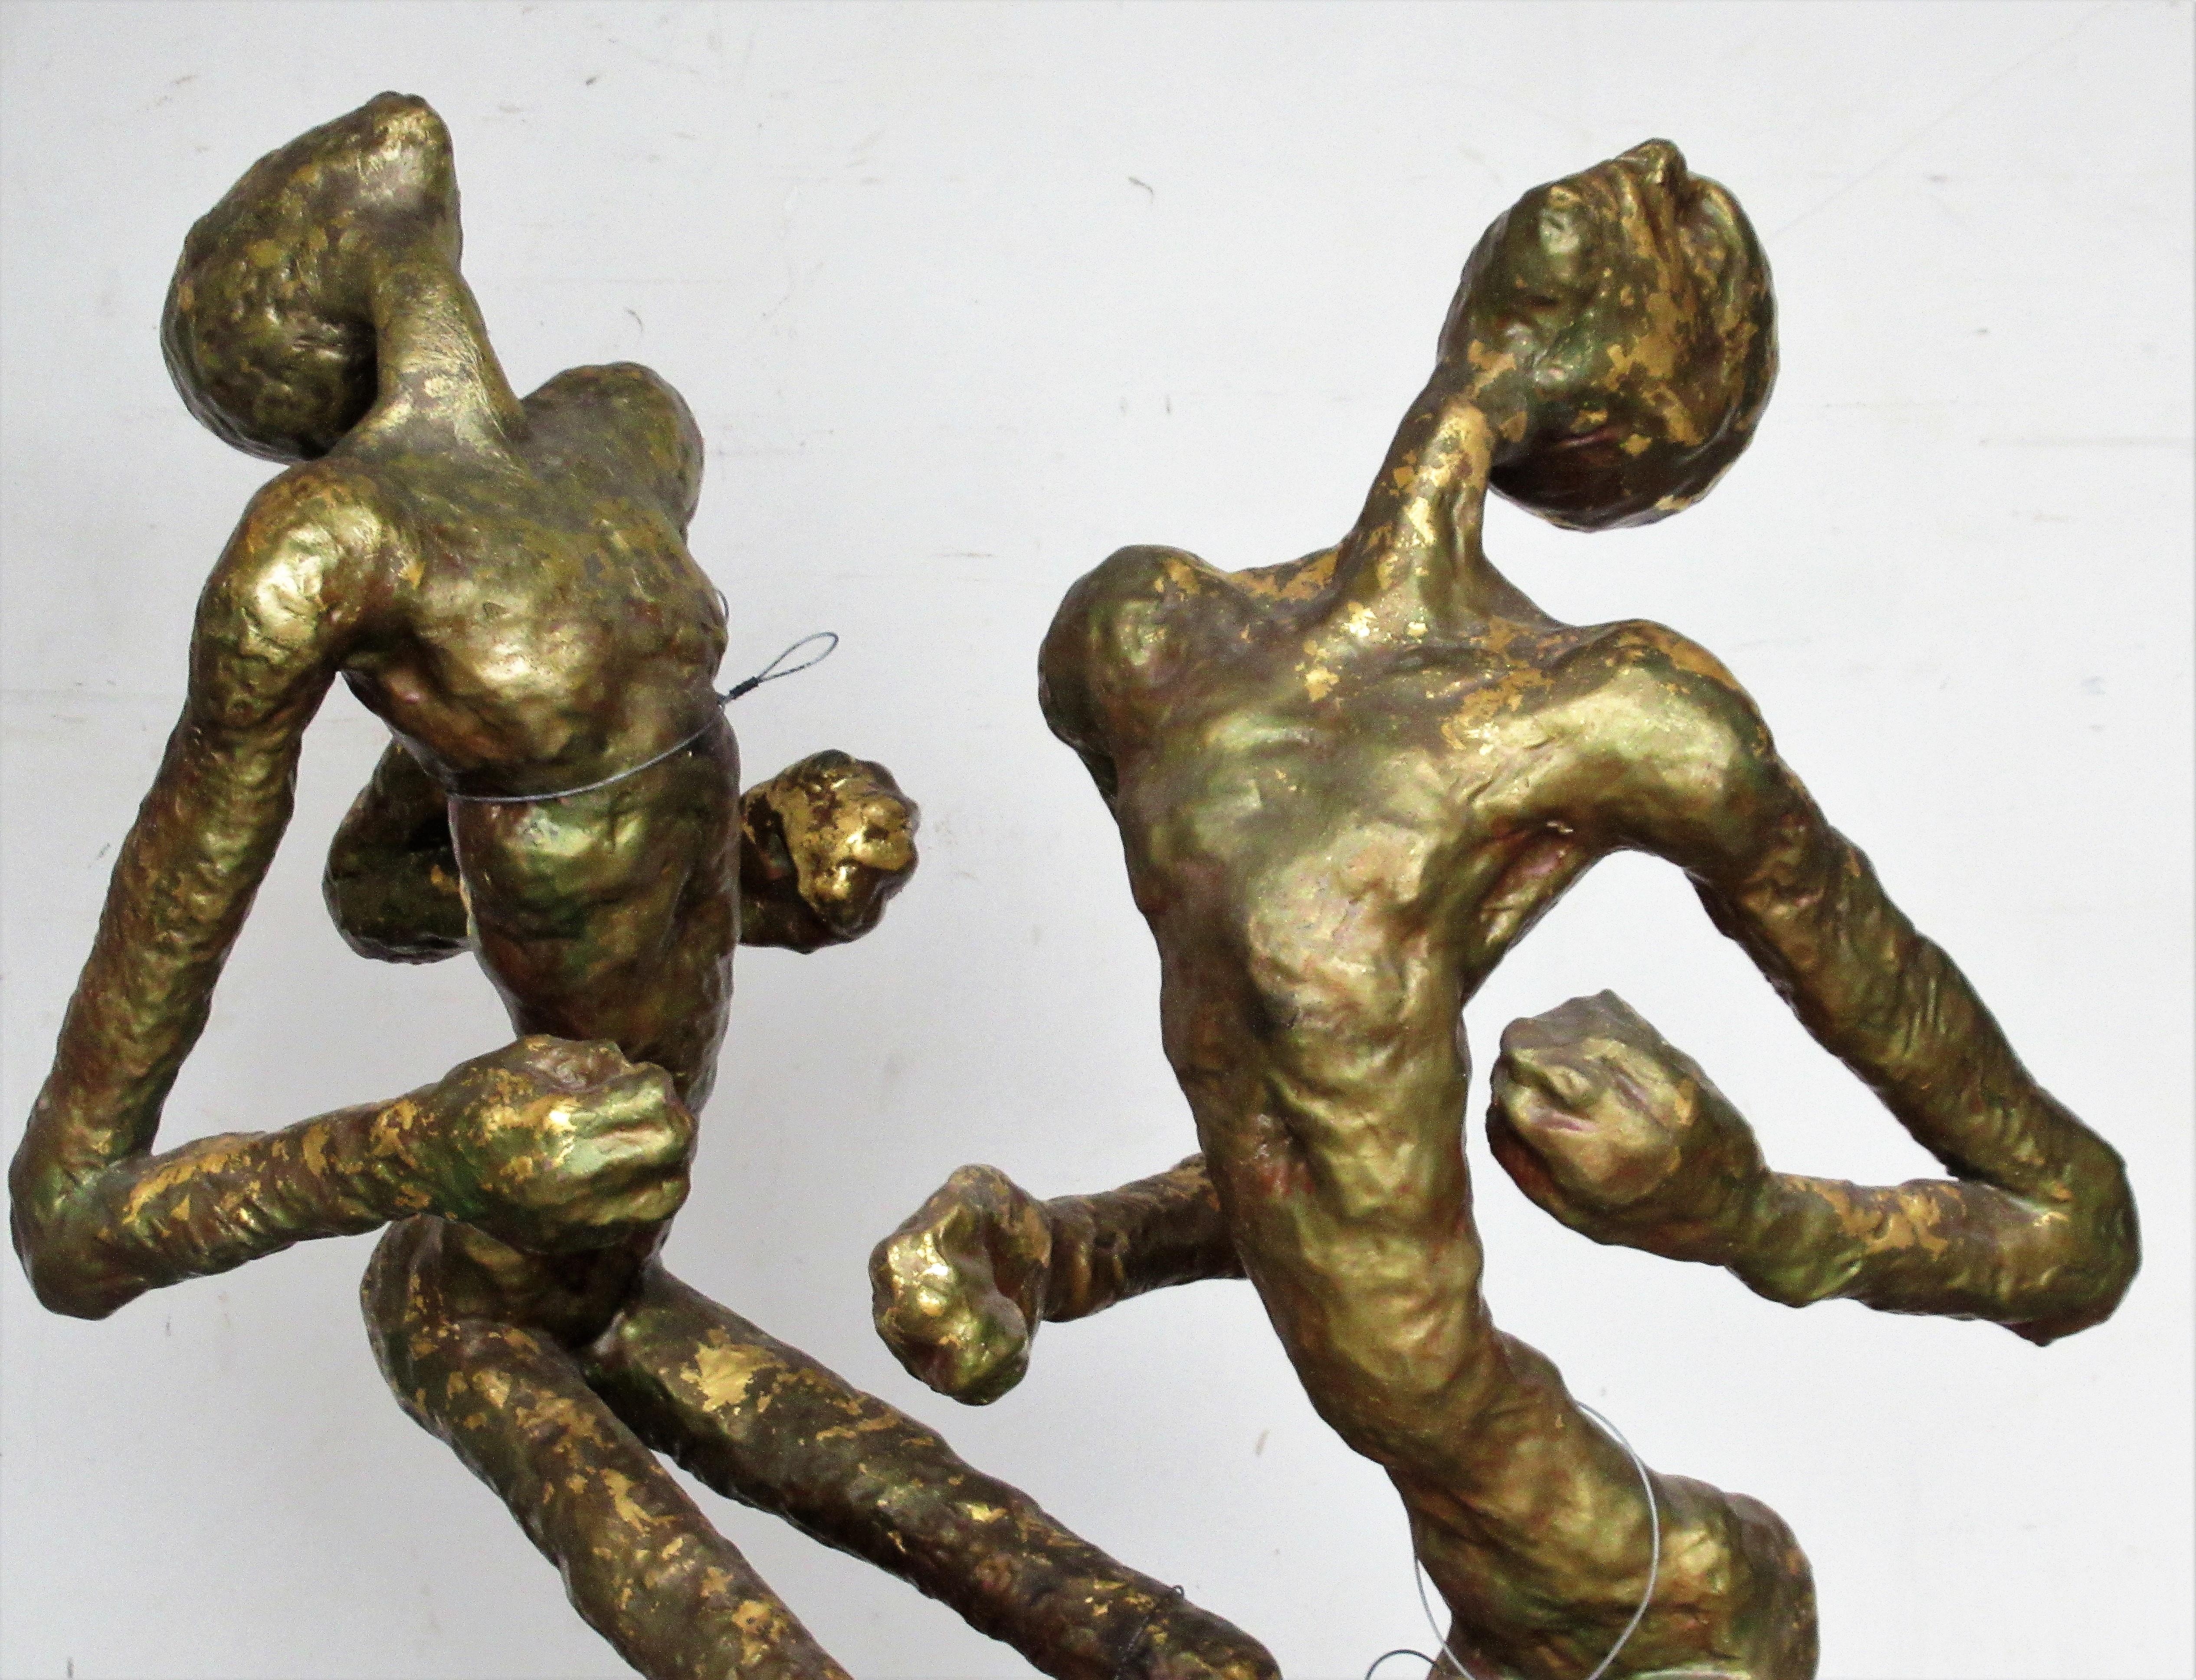 Vintage handcrafted gilded and bronzed brass clad metal large figural props ( over 40 inches high ) with dynamic sculptural motion that look great from all angles. These were purportedly used by the internationally acclaimed dance theater